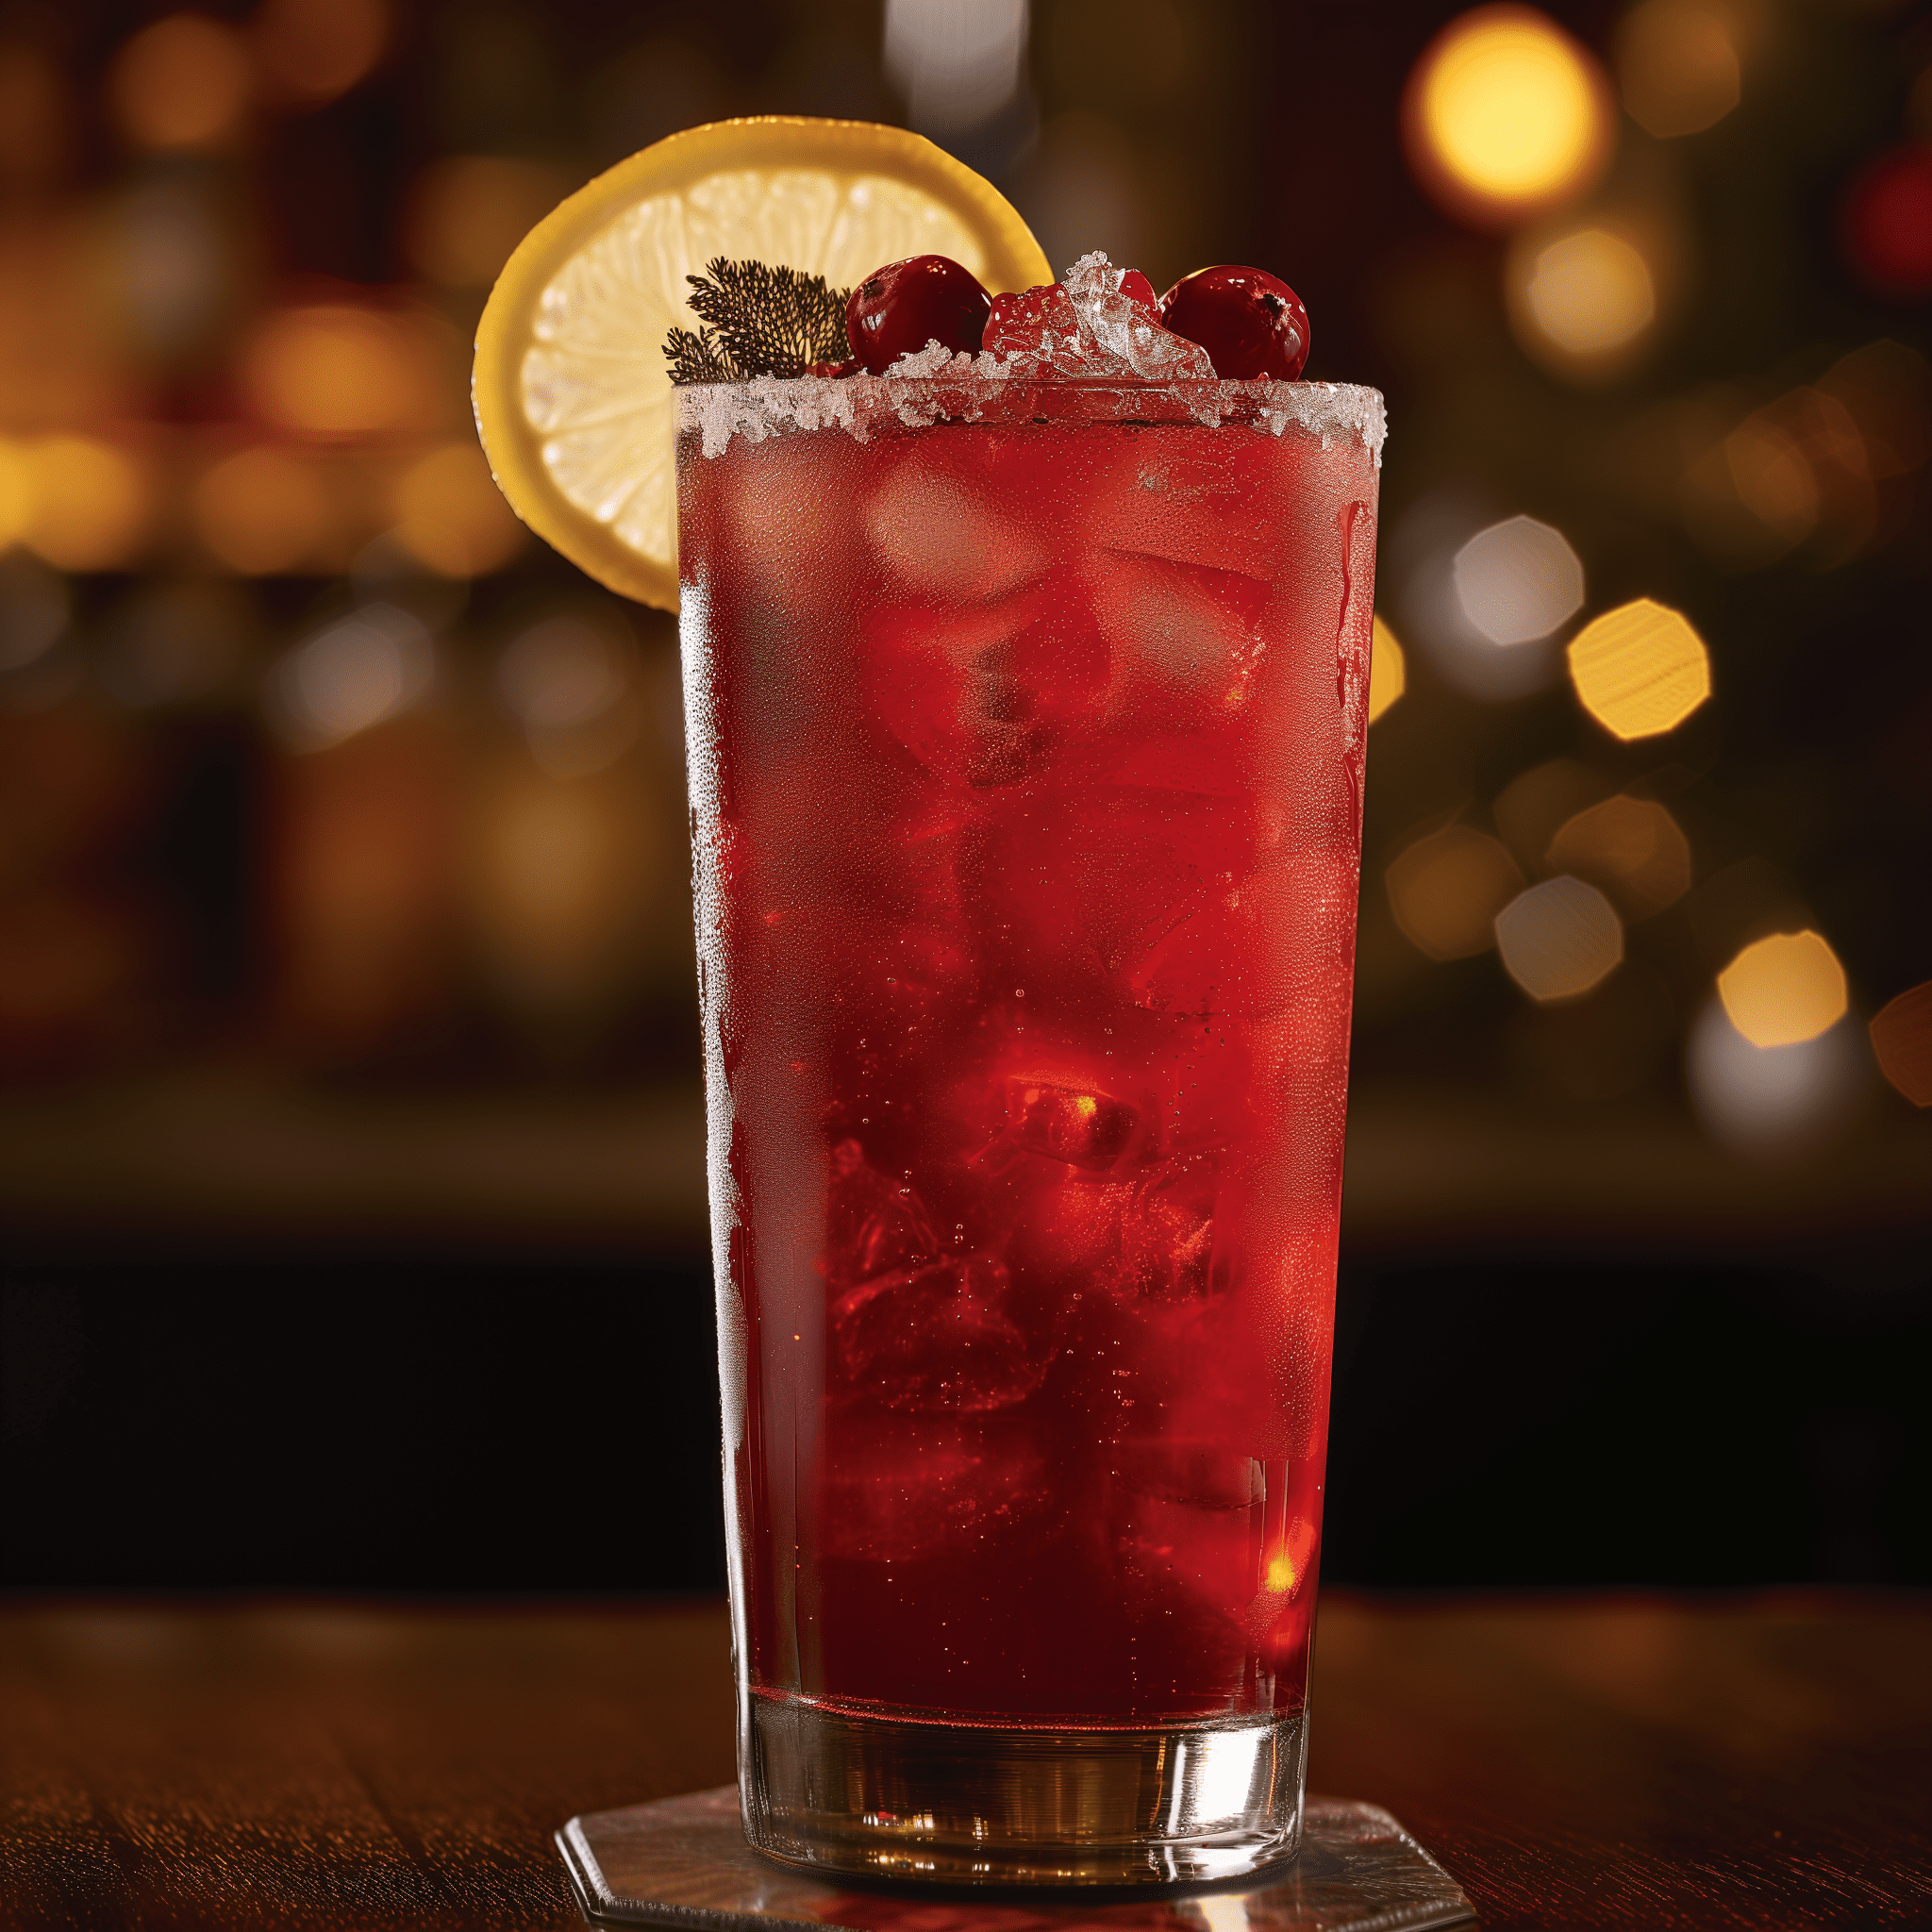 Merry Berry Buck Cocktail Recipe - The Merry Berry Buck offers a harmonious blend of sweet and tart flavors, with the robustness of Maker's Mark Bourbon softened by the tangy lemon and sweet cranberry juice. The ginger beer adds a spicy effervescence that makes the drink lively and invigorating.